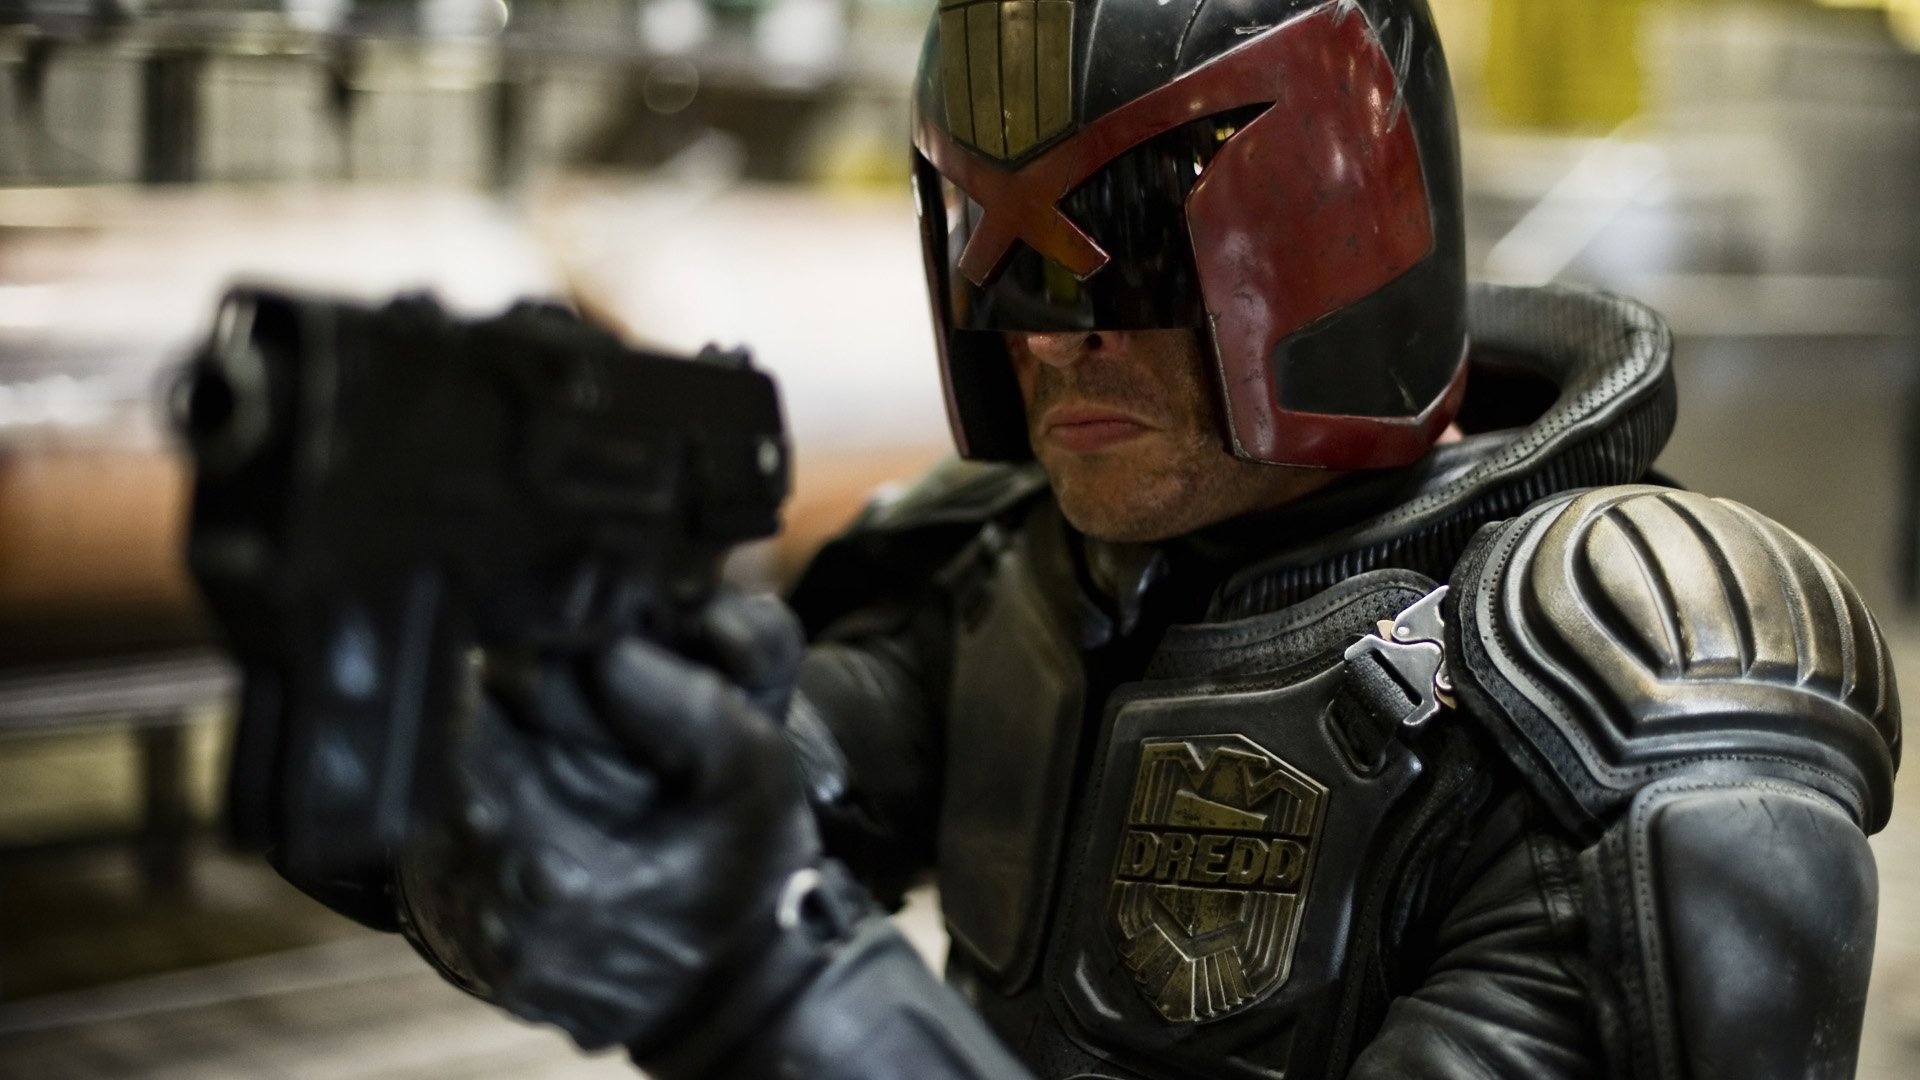 Dredd: The most feared and powerful member of an elite corps of Judges. 1920x1080 Full HD Background.